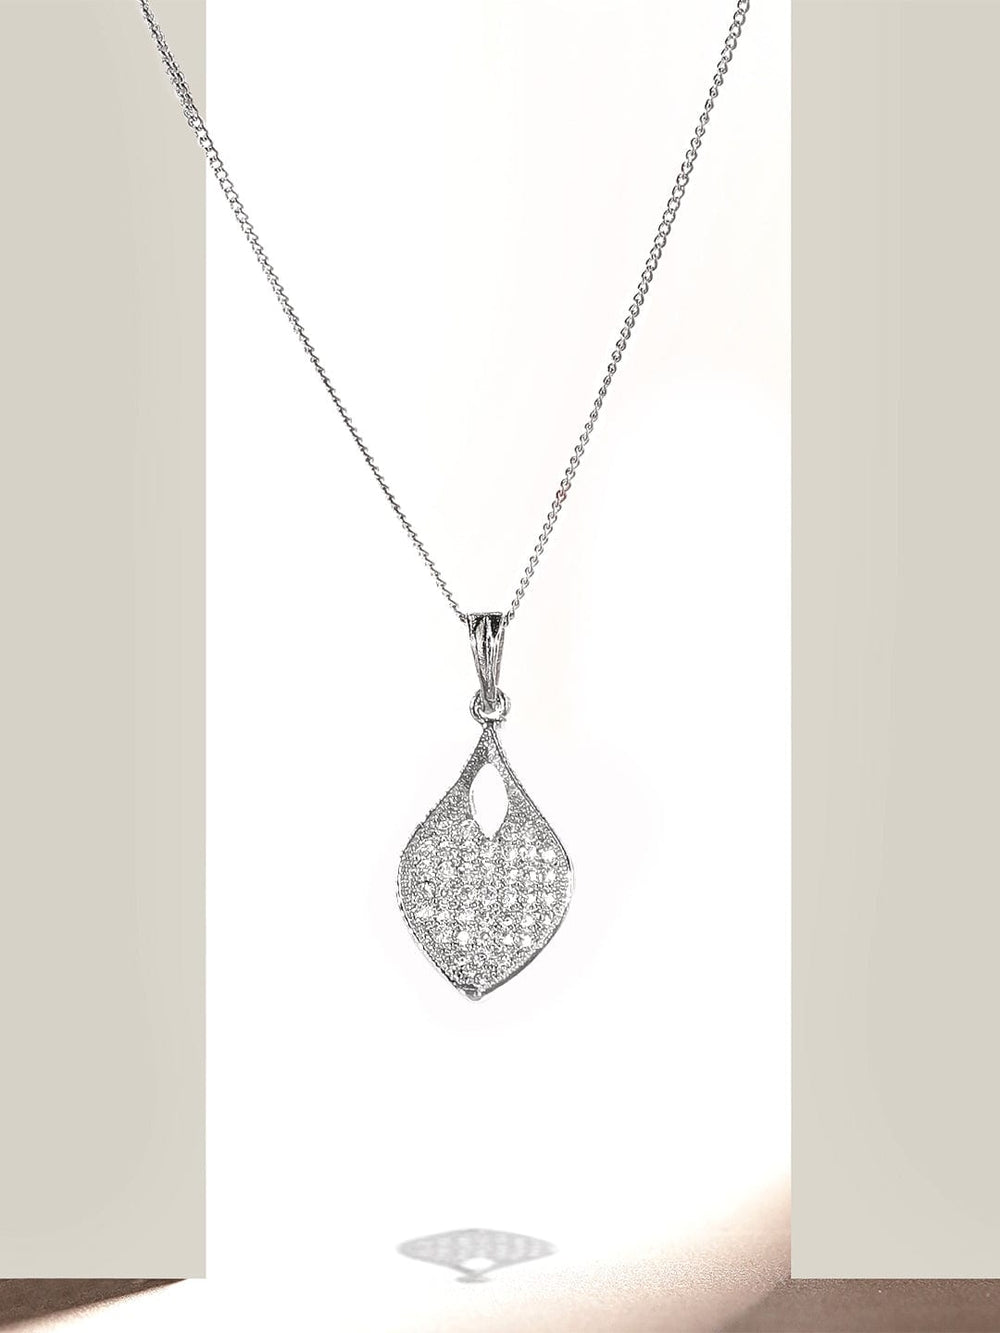 Rubans Rhodium plated, Minimal Chain Contemporary Heart Motif Zircons studded Pendant Necklace. Chain & Necklaces